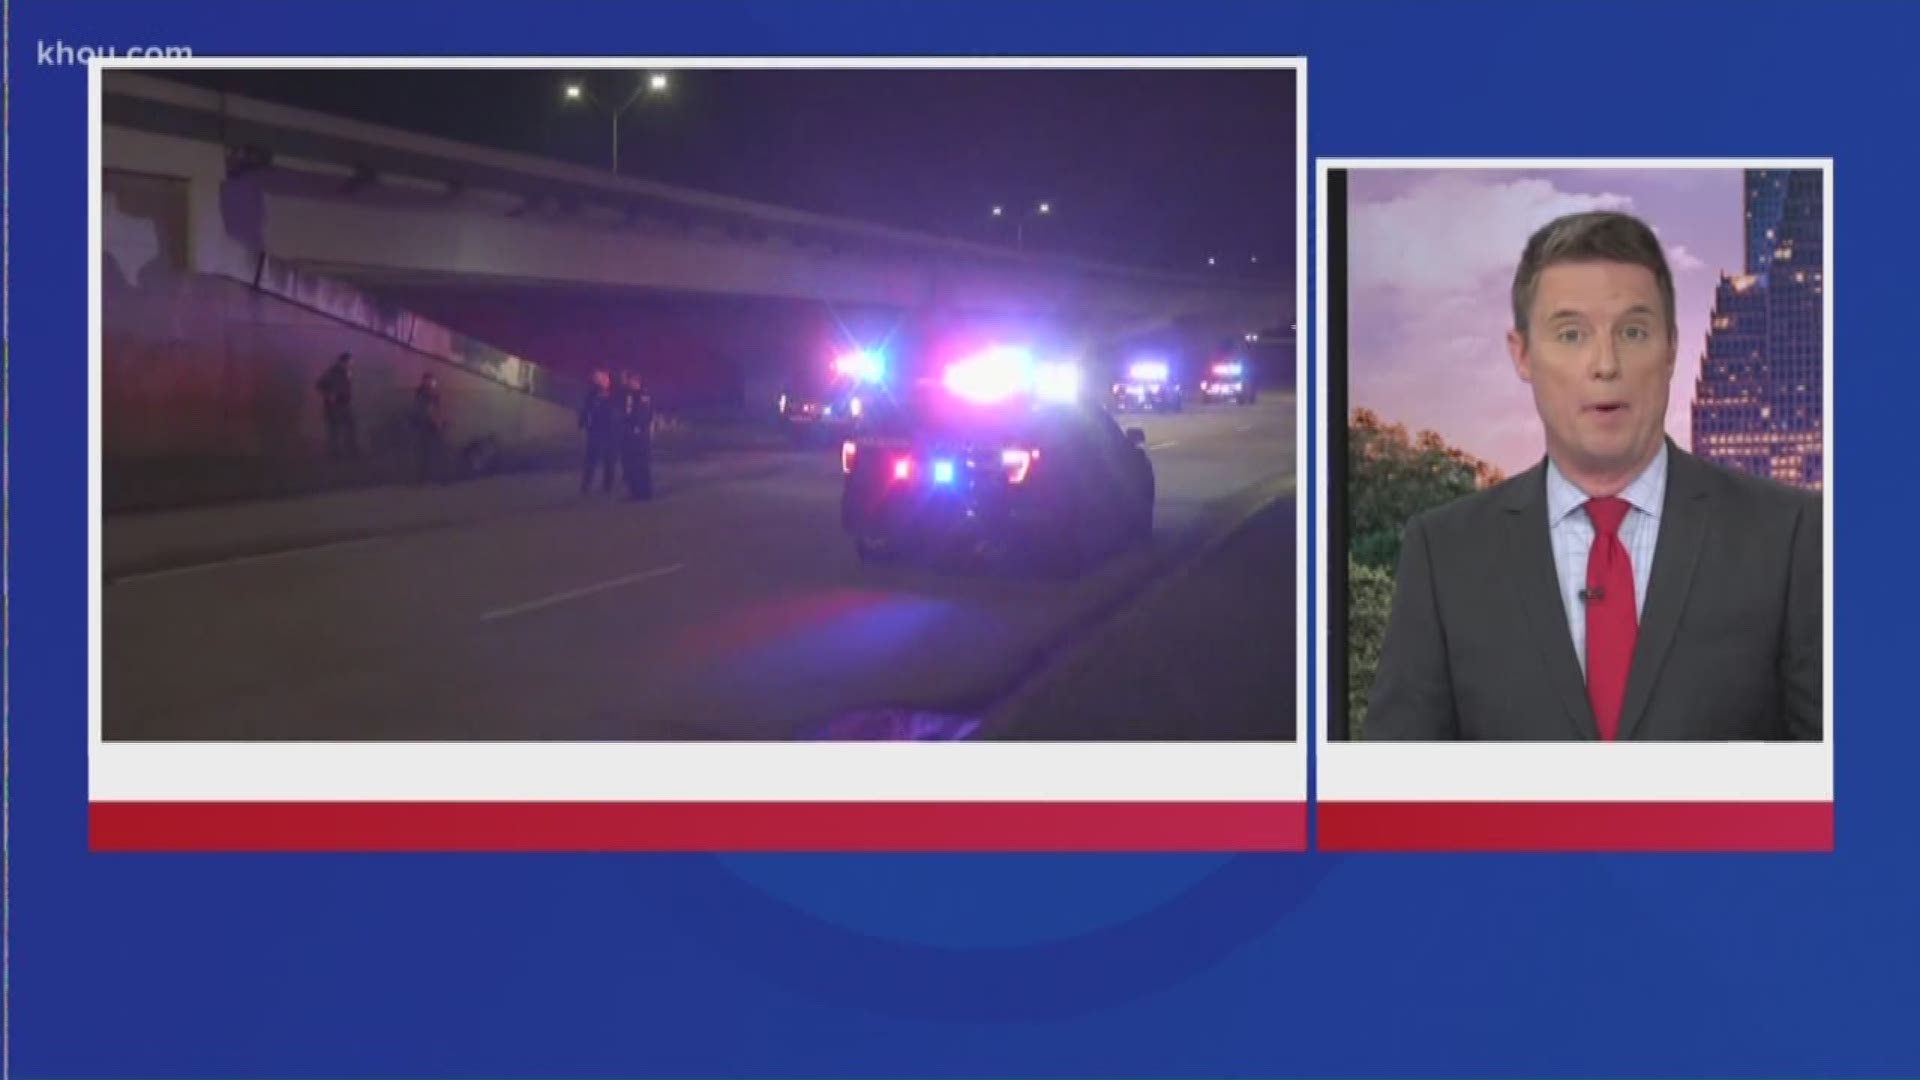 Top headlines at 6 a.m. include a man jumps from a freeway overpass during a police chase,  the latest on an abandoned toddler in Montgomery County and reaction to the Astros loss.